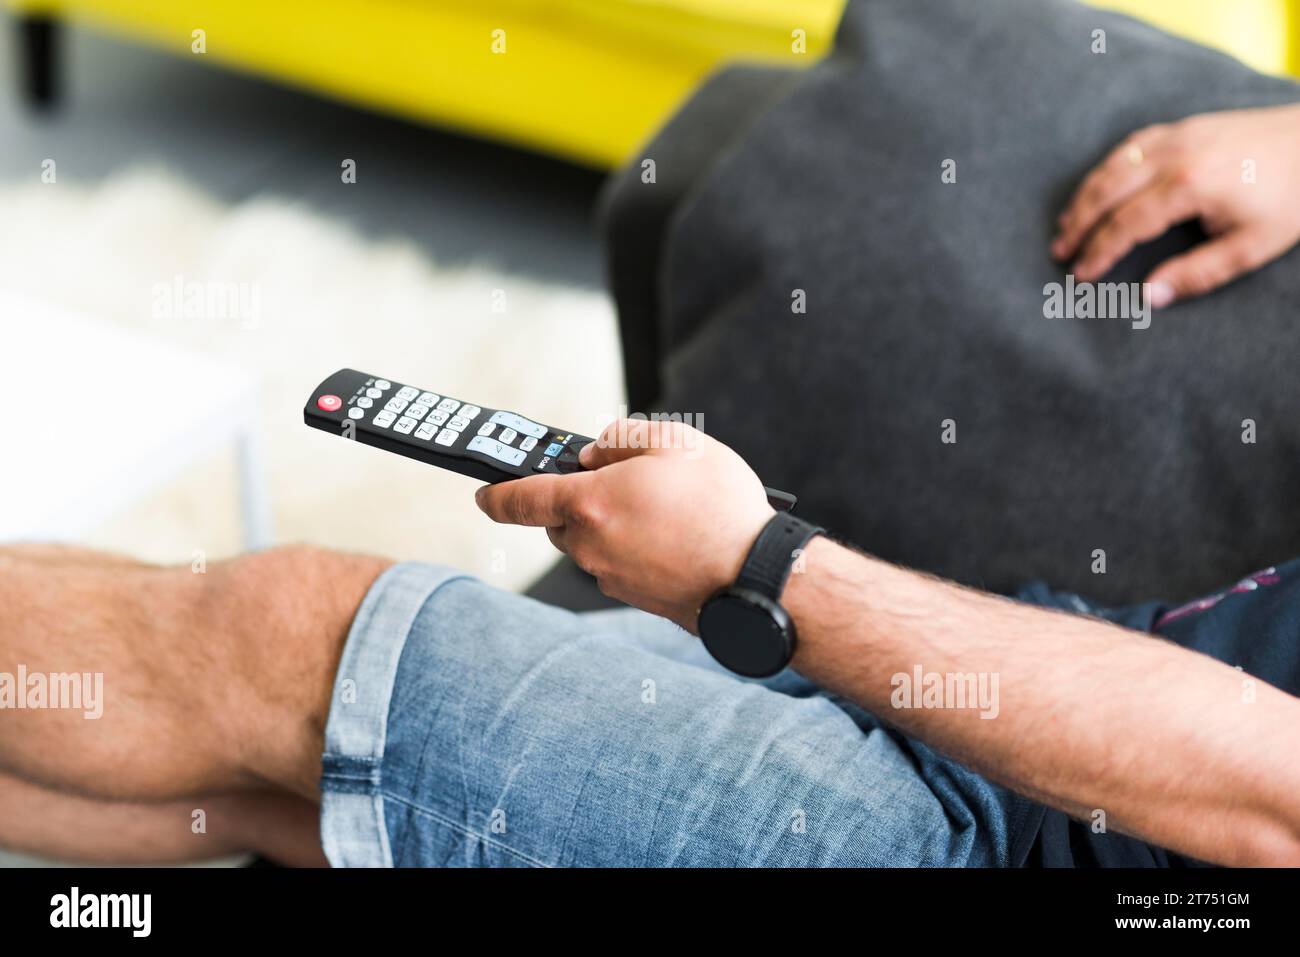 Close up man s hand holding television remote control Stock Photo